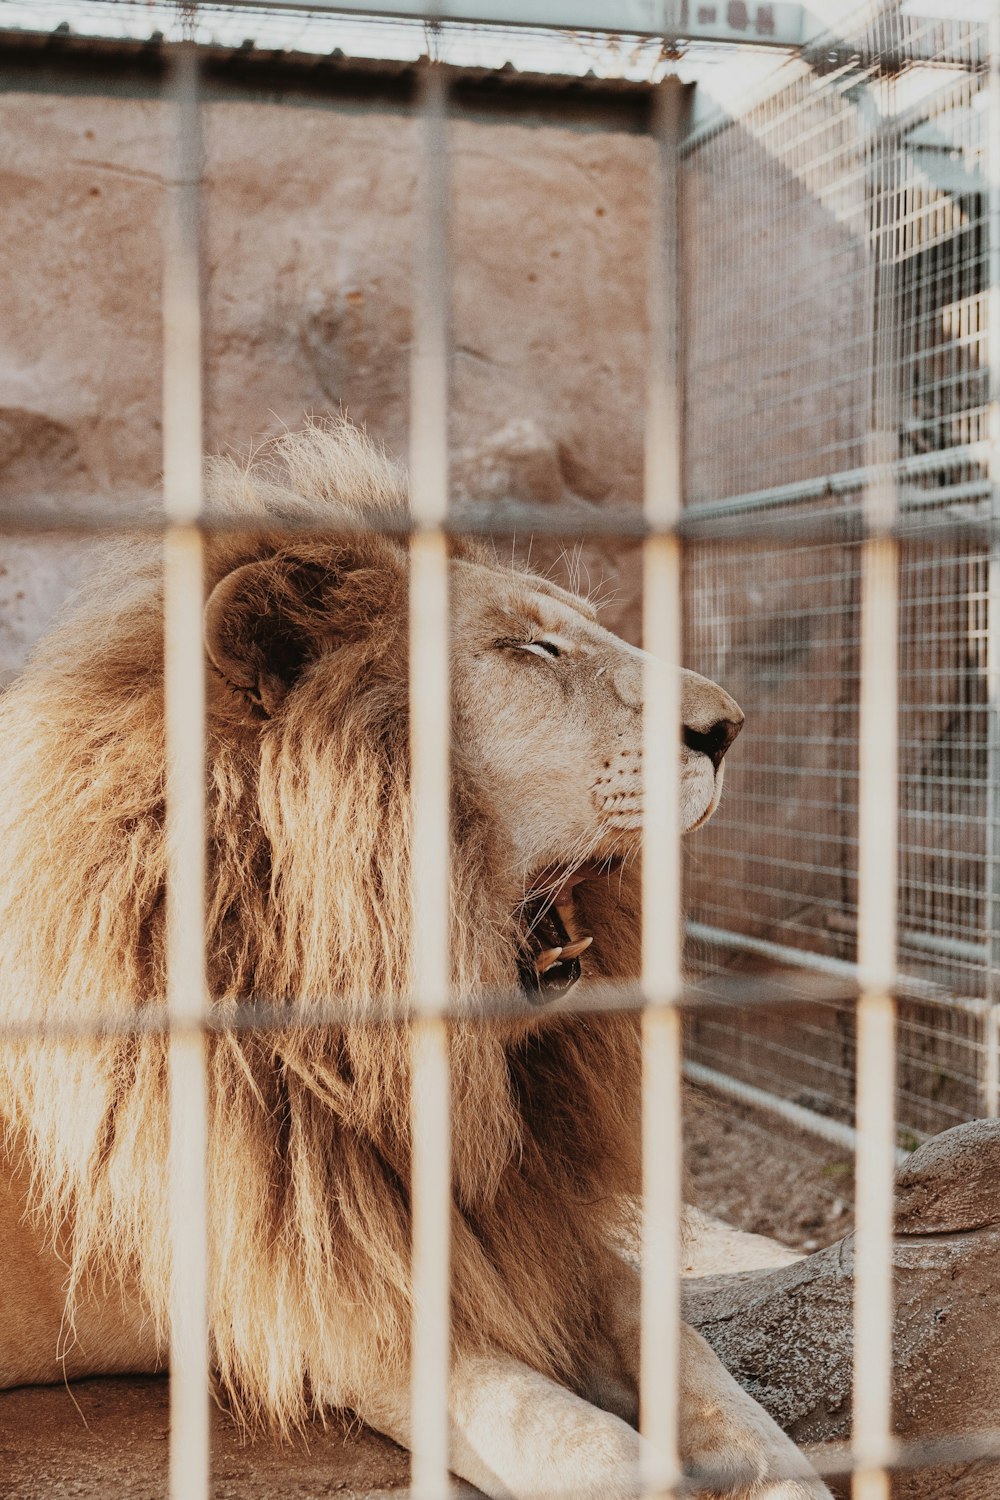 lion in cage during daytime